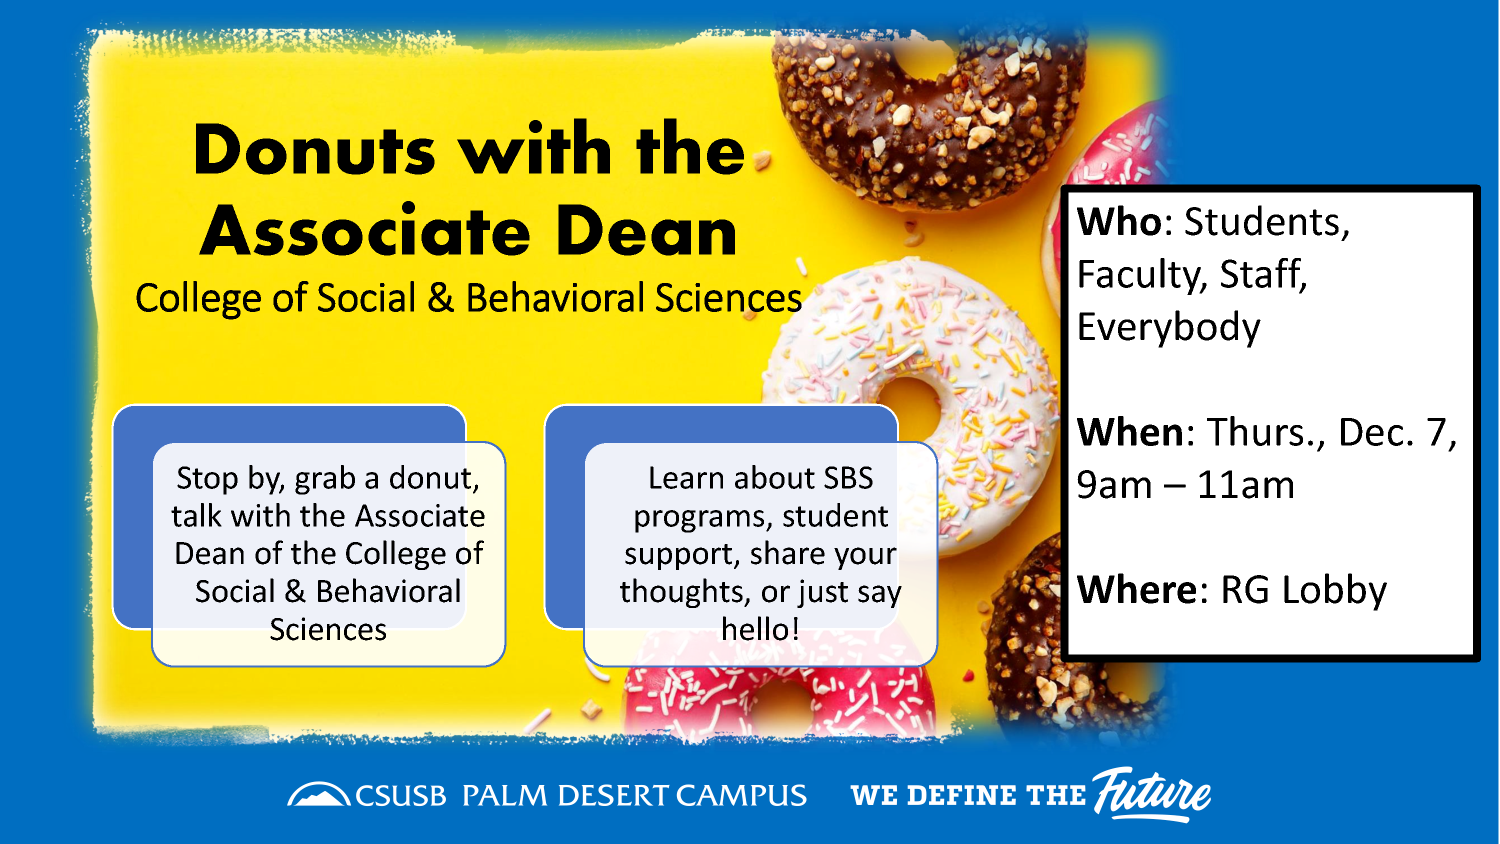 PDC Donuts with the Associate Dean flyer